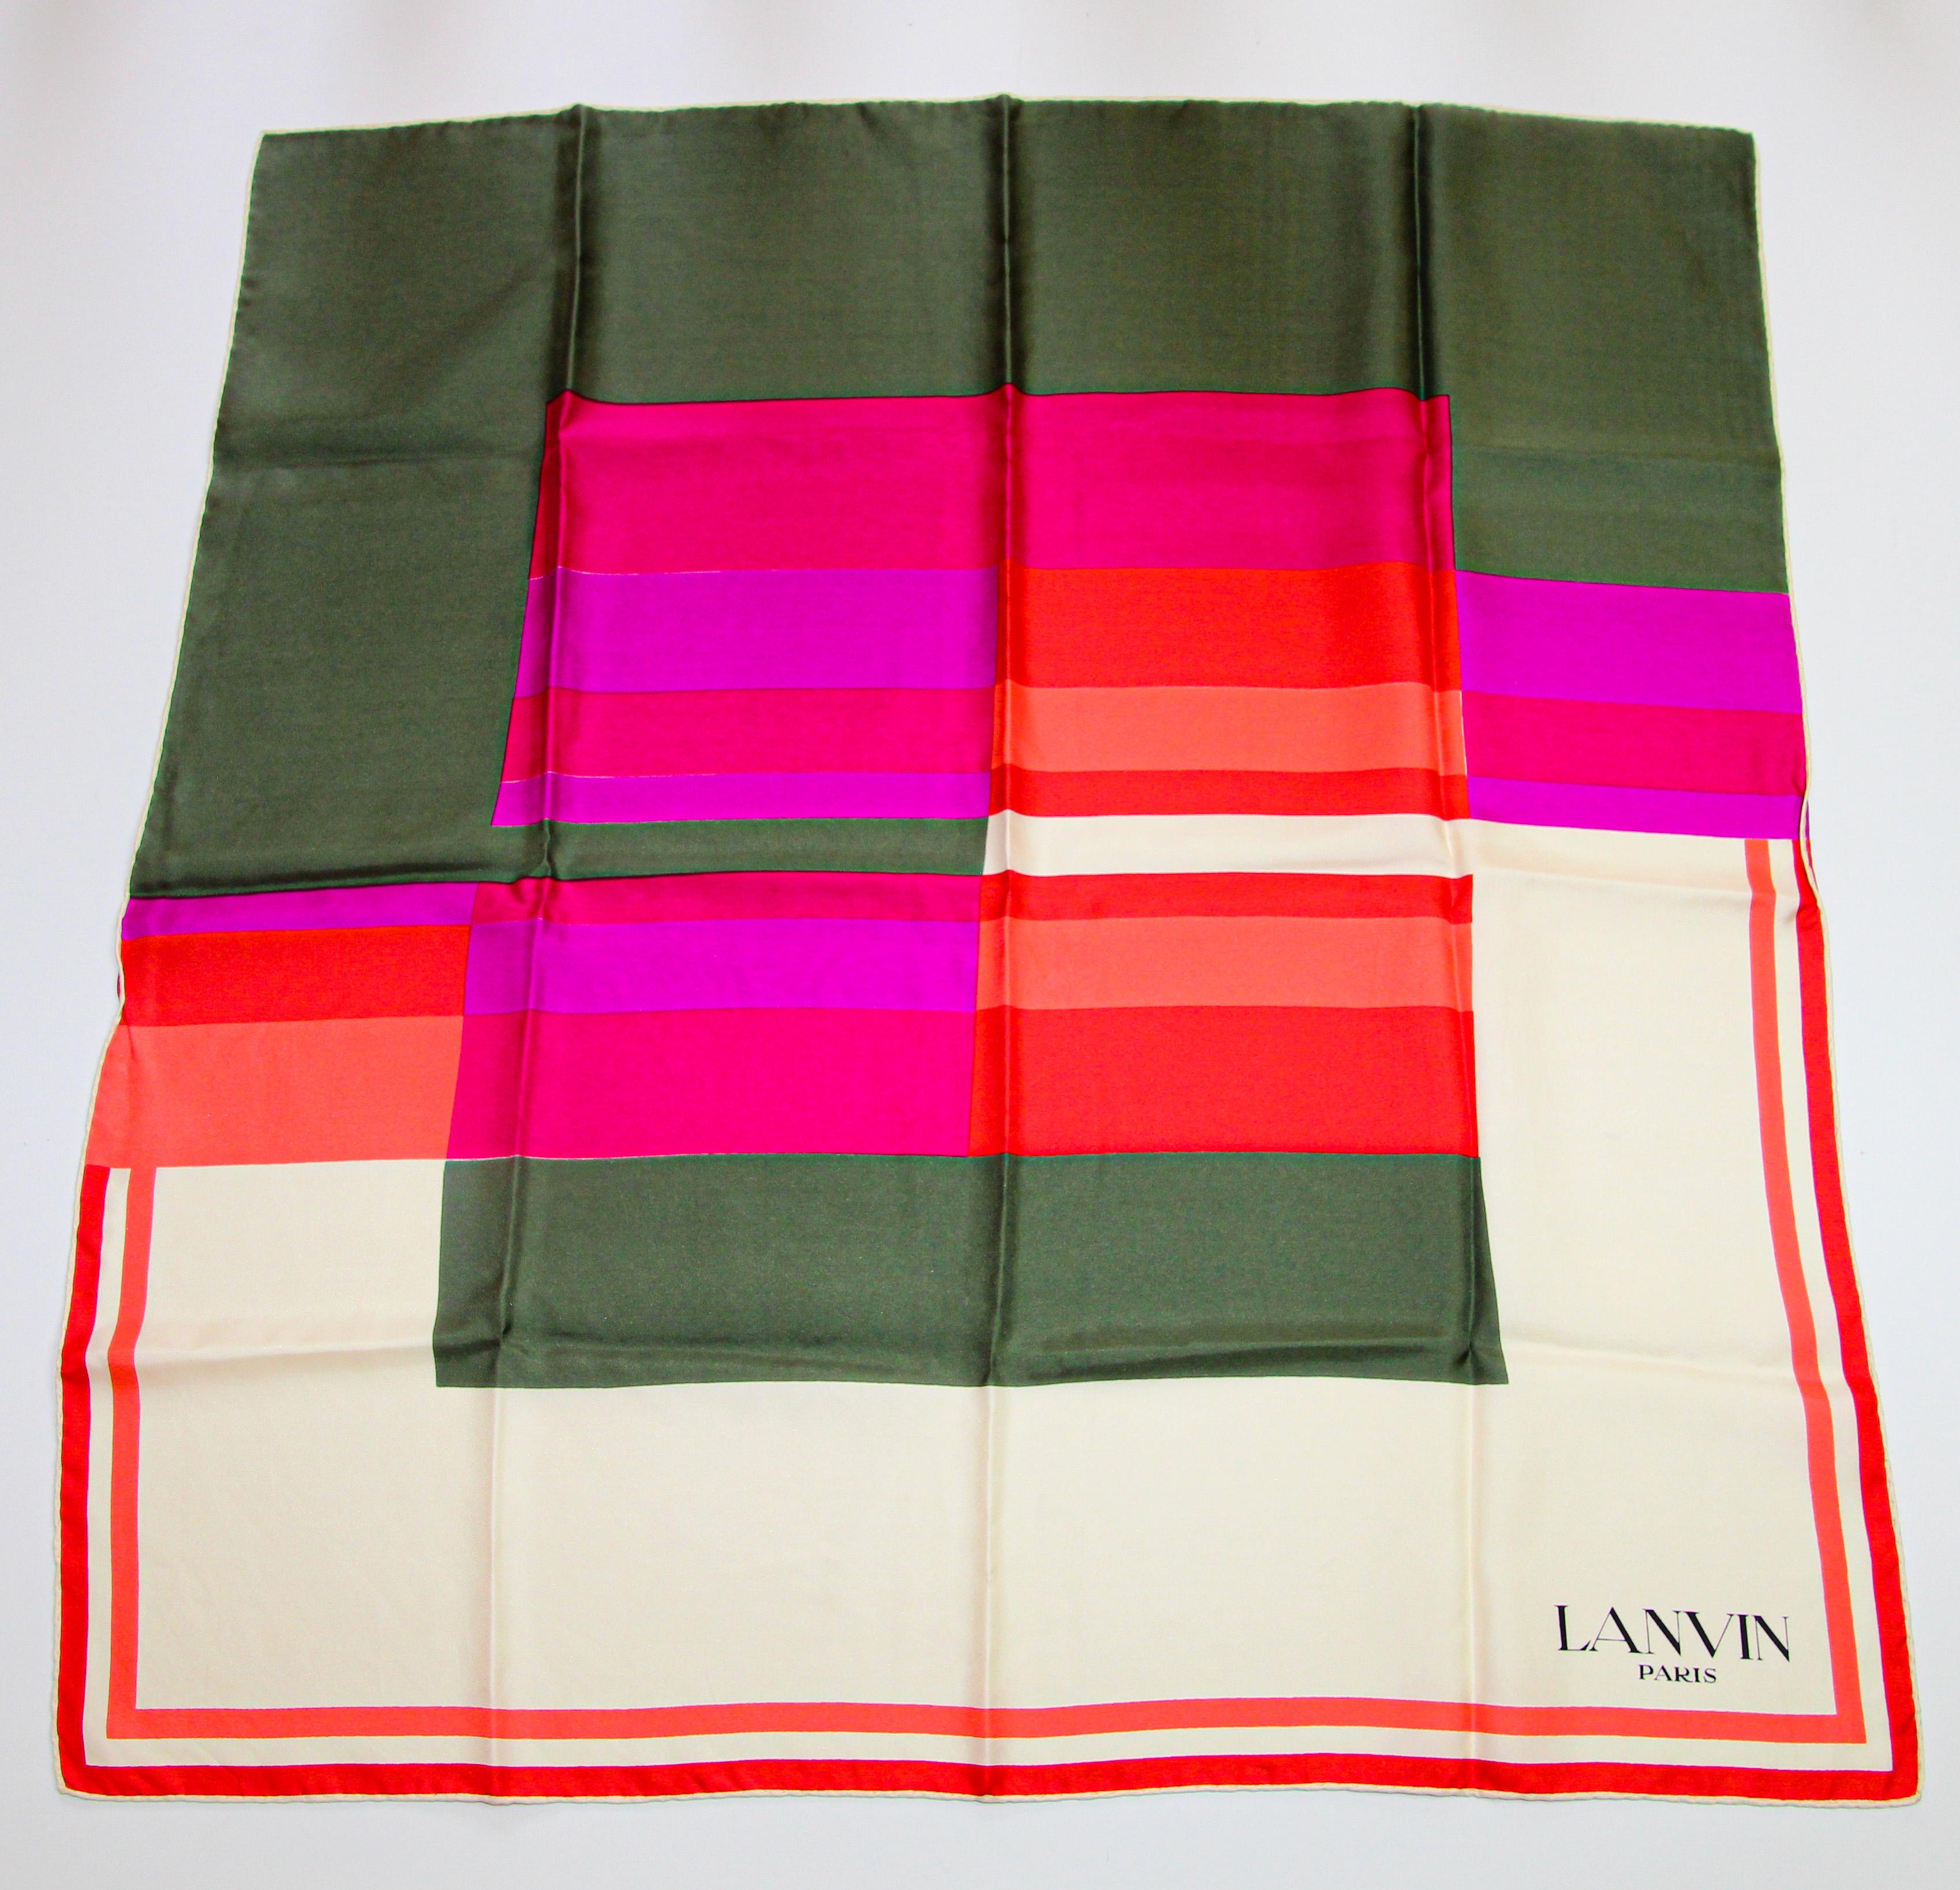 Gorgeous vintage Carre silk scarf Lanvin in mint pristine condition.
Carre accessorie Lanvin vintage scarf.
Stunning colorful french vintage scarf from Lanvin Paris.
Retro from the 60s / 70s
Designed by french artist Jeanne Lanvin.
Motif: